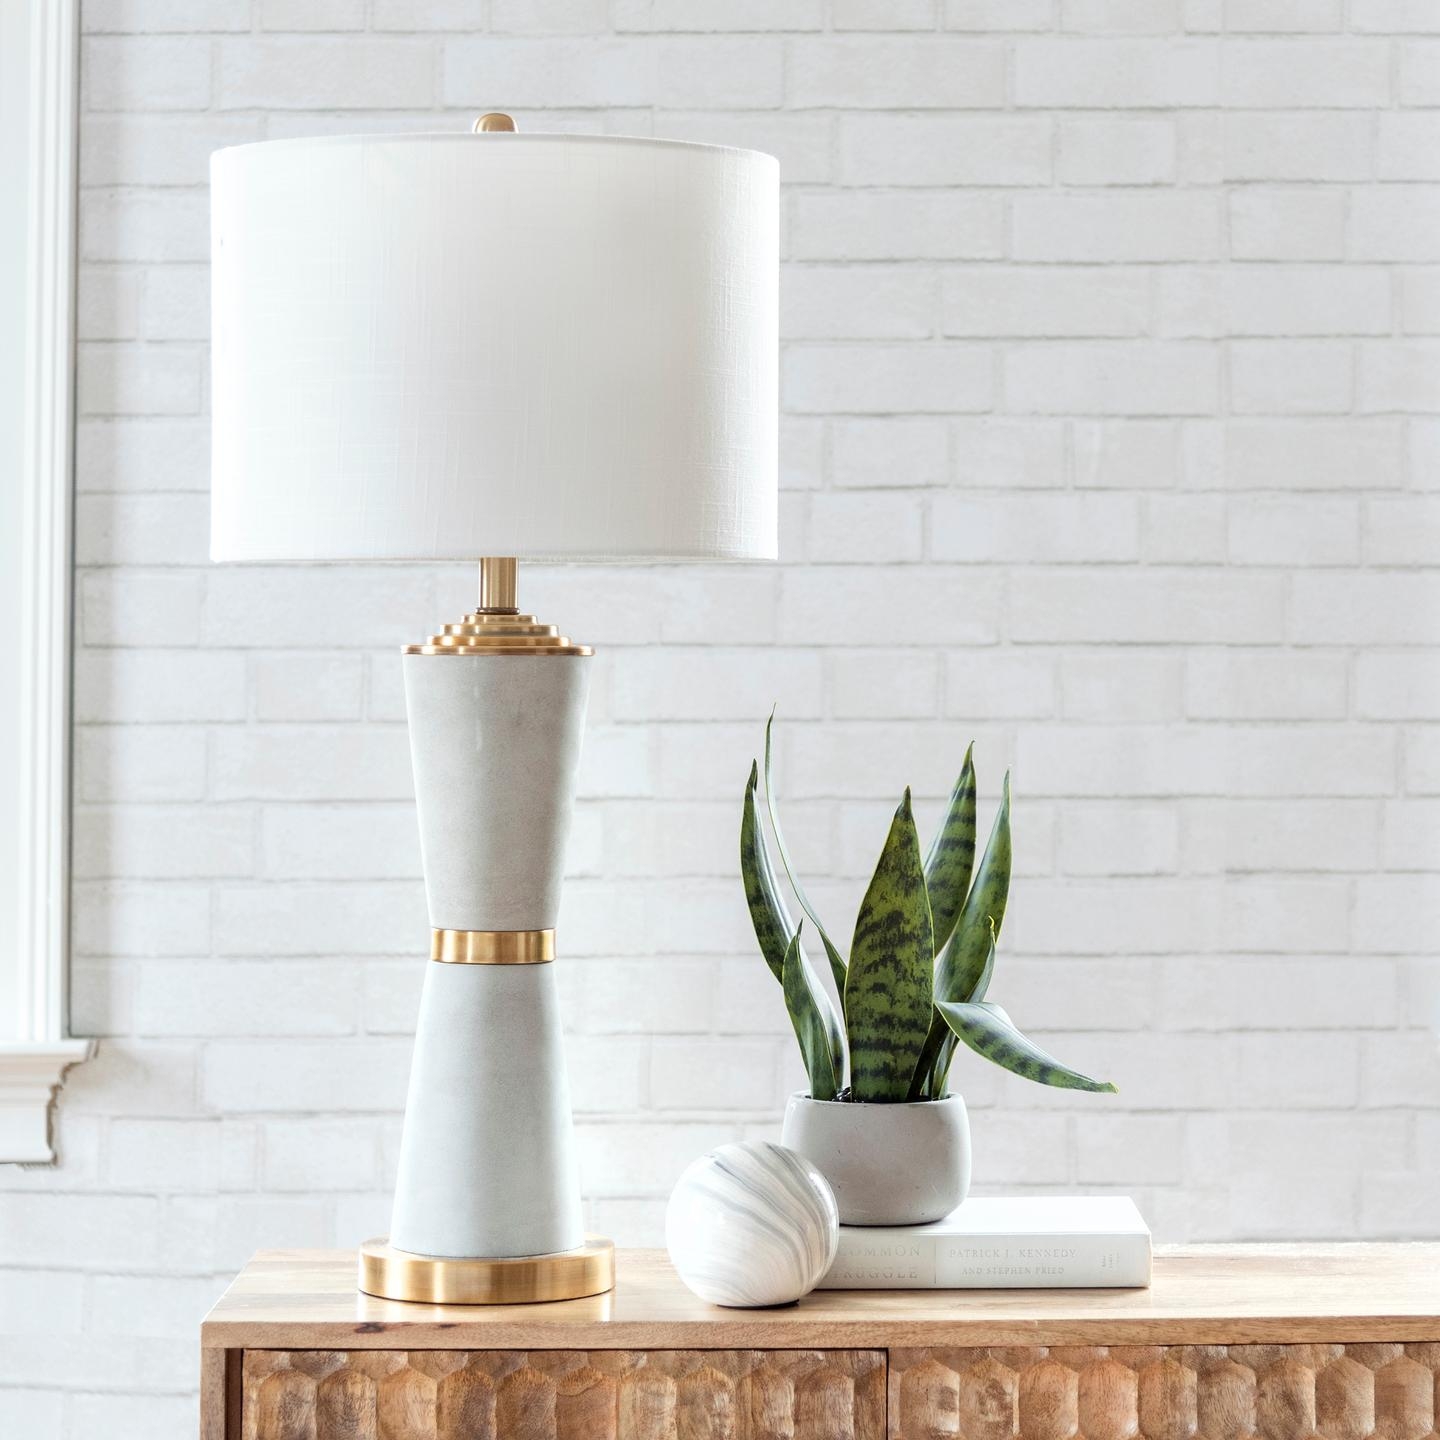 Pacific 29" Cement Table Lamp - Image 4